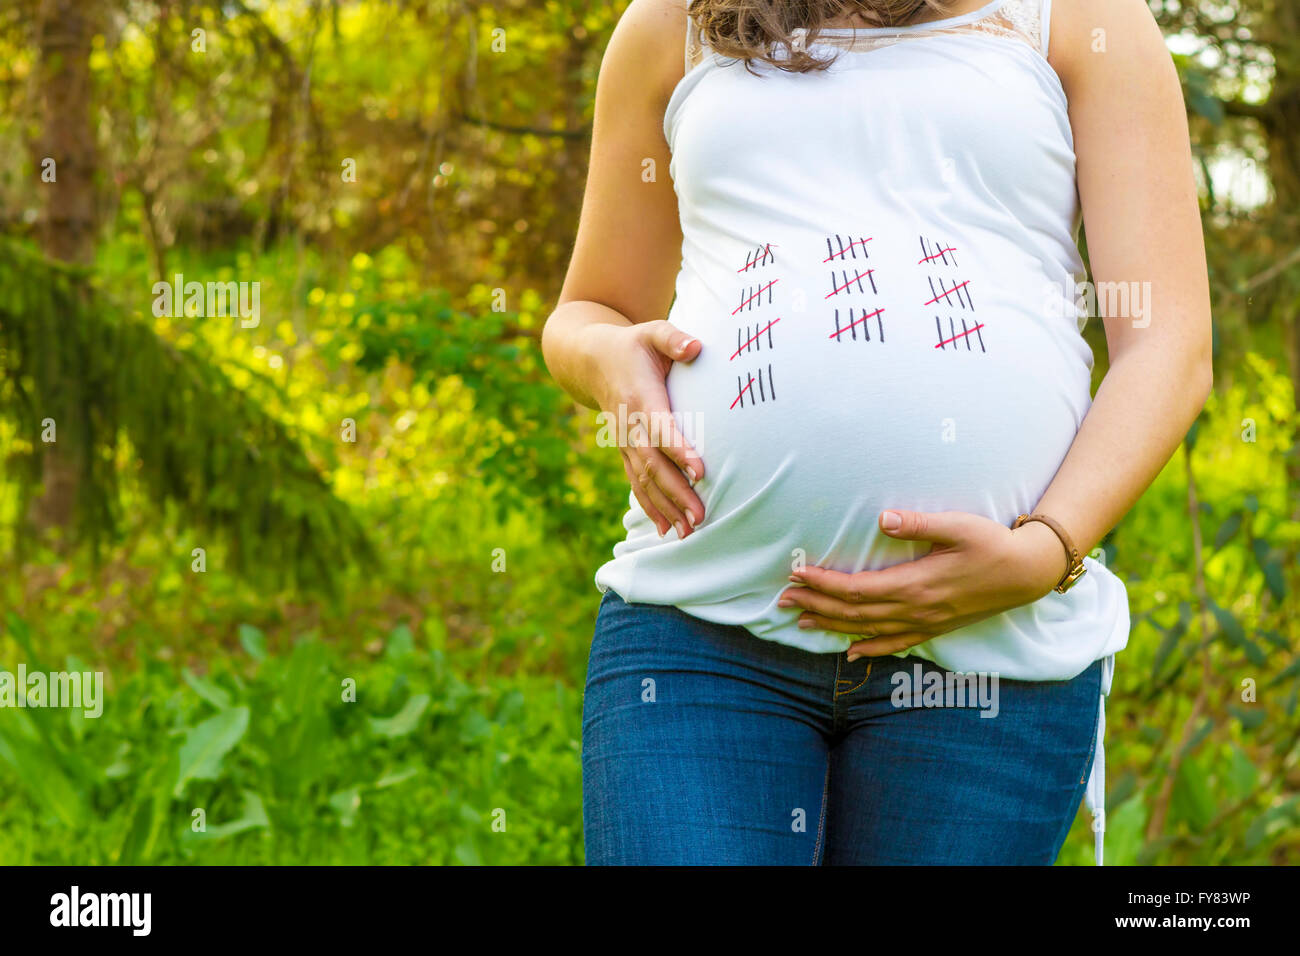 Pregnant young woman outdoors in warm summer day close up with calendar on her t-shirt. Stock Photo